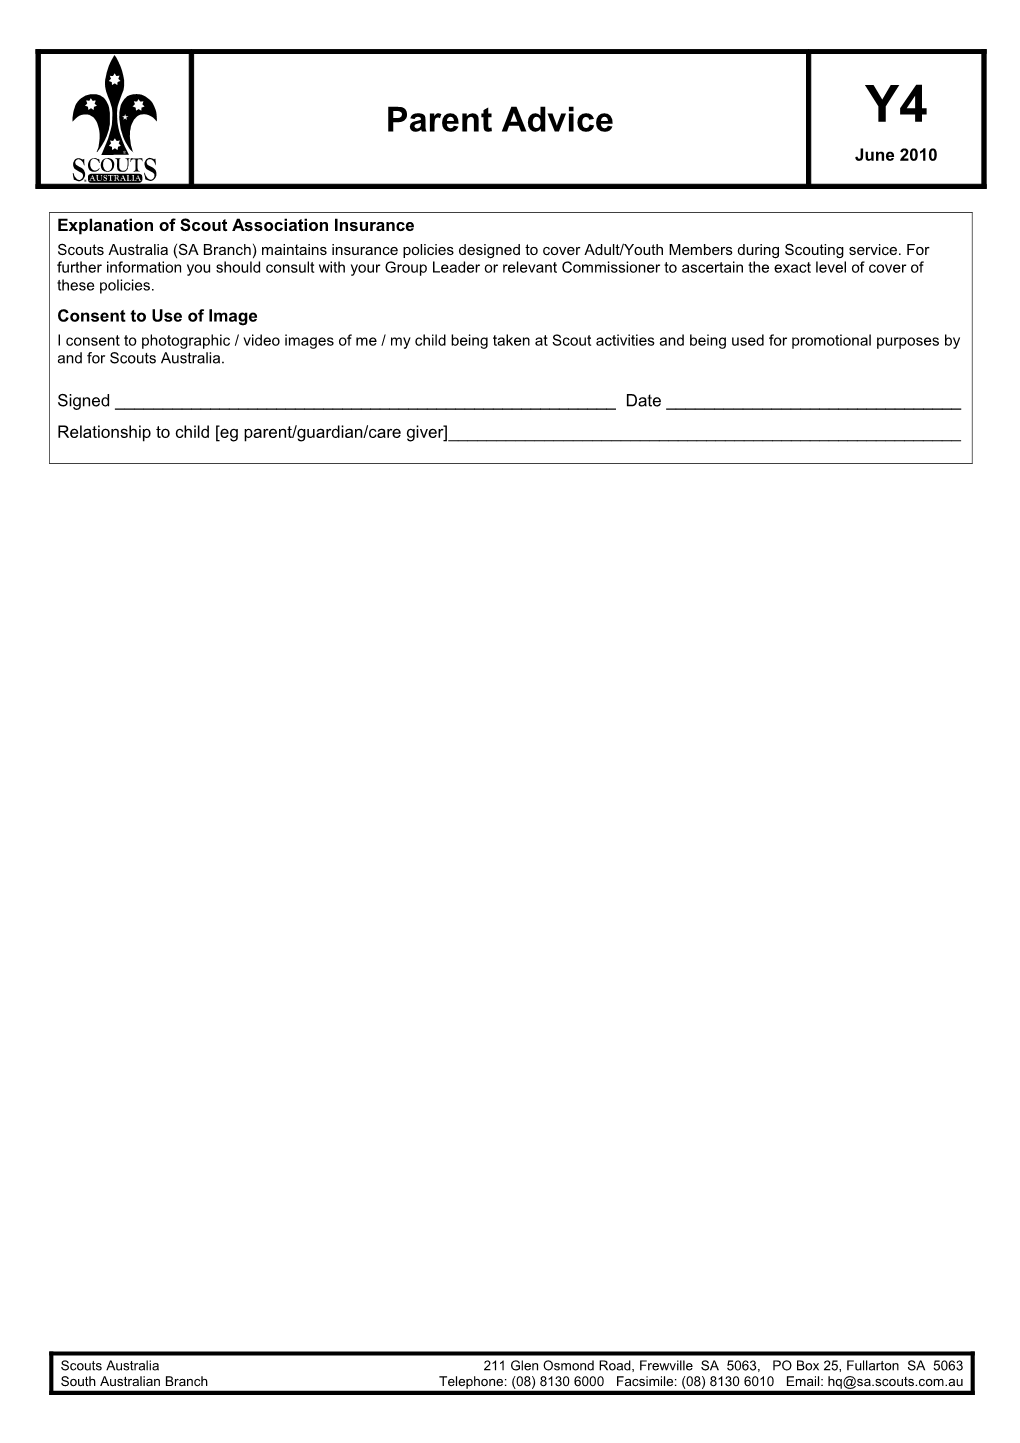 Parent to Retain This Page of the Form